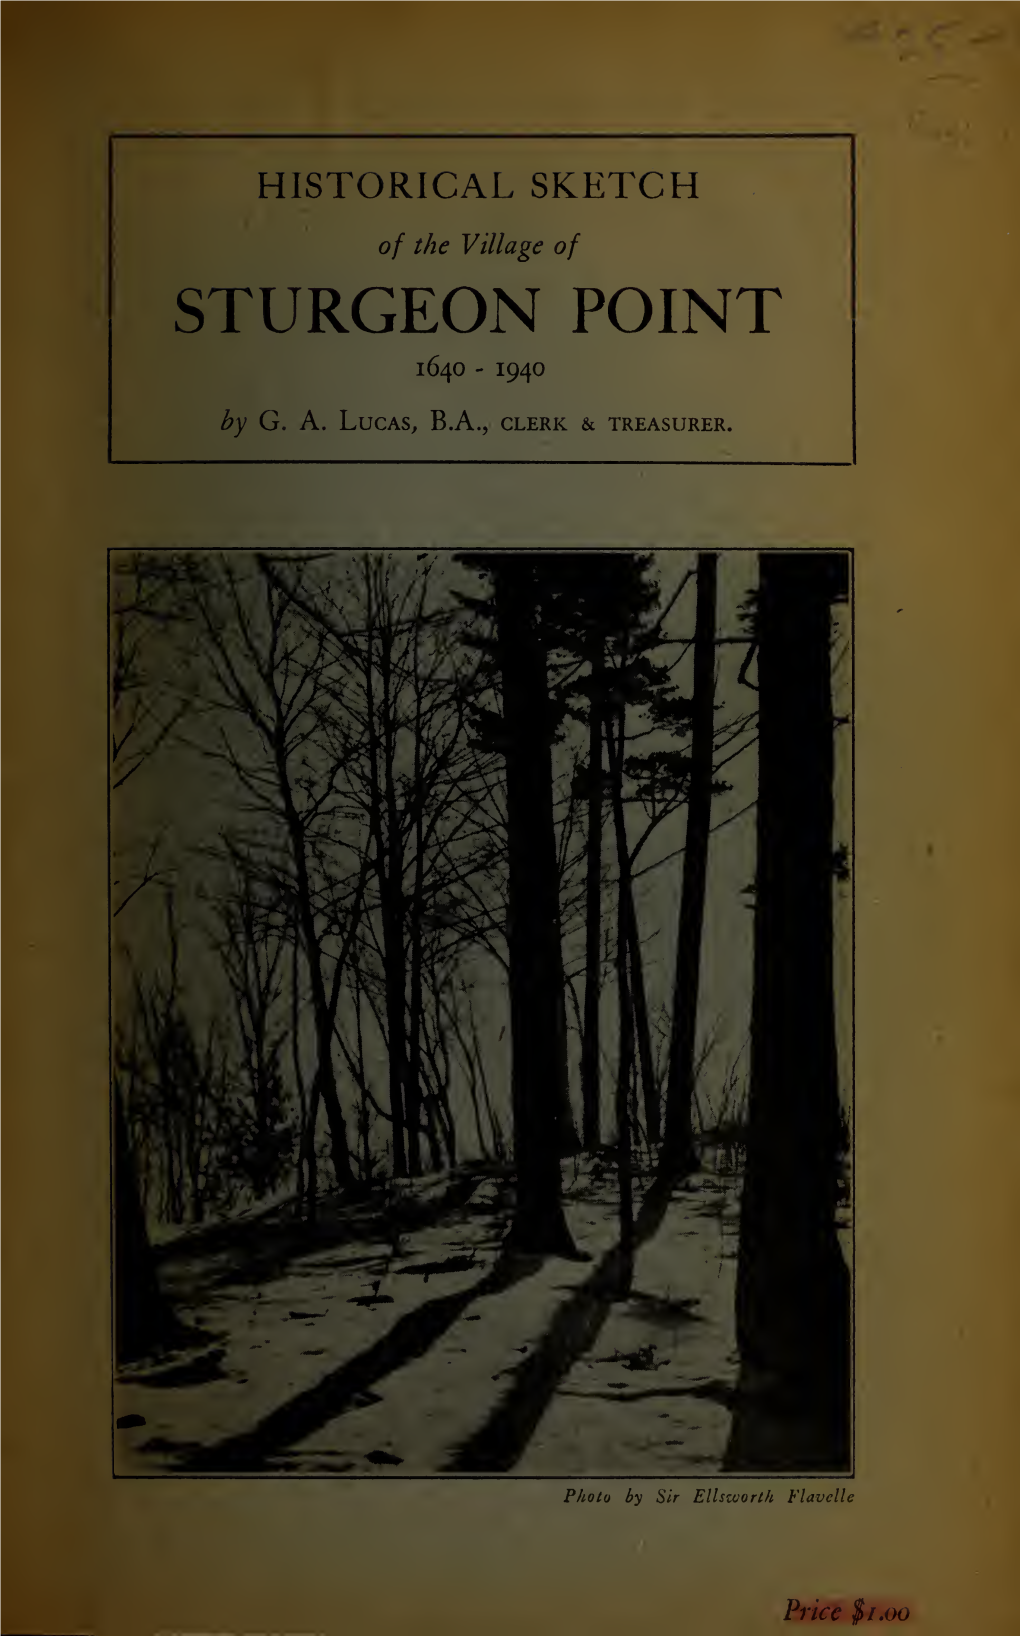 Historical Sketch of the Village of Sturgeon Point, 1640-1940